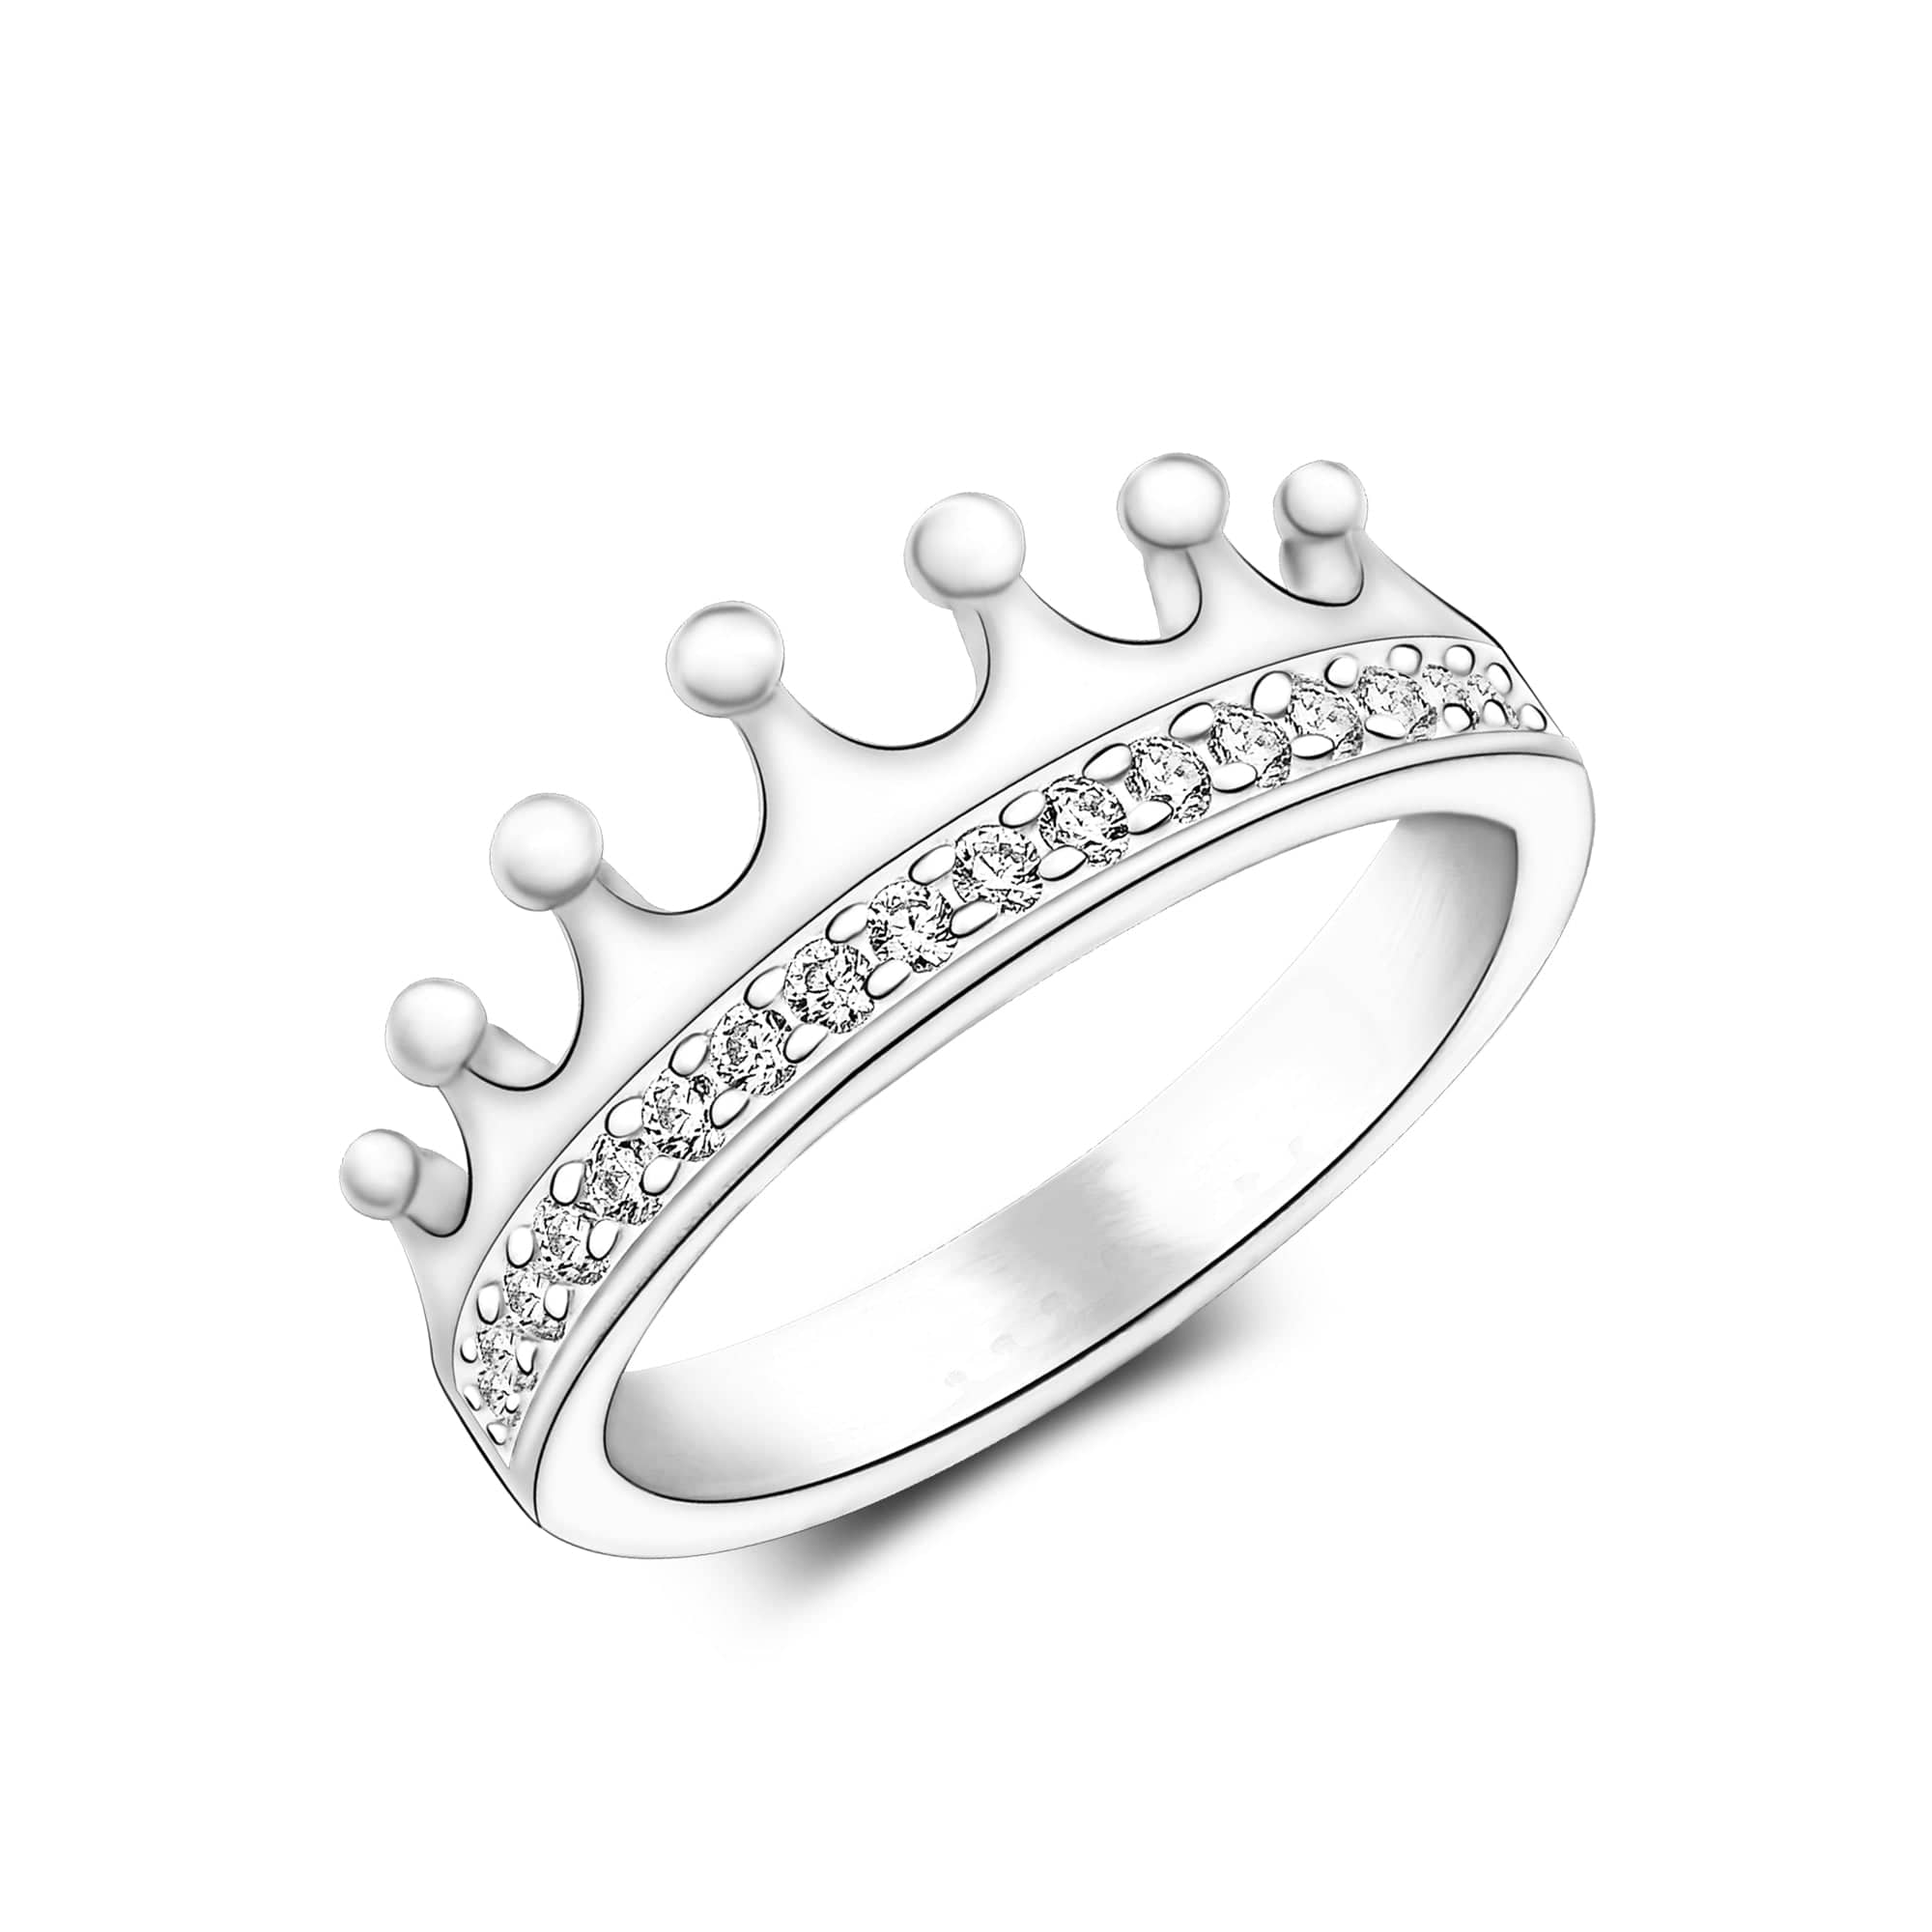 Engagement Ring and Crown Ring